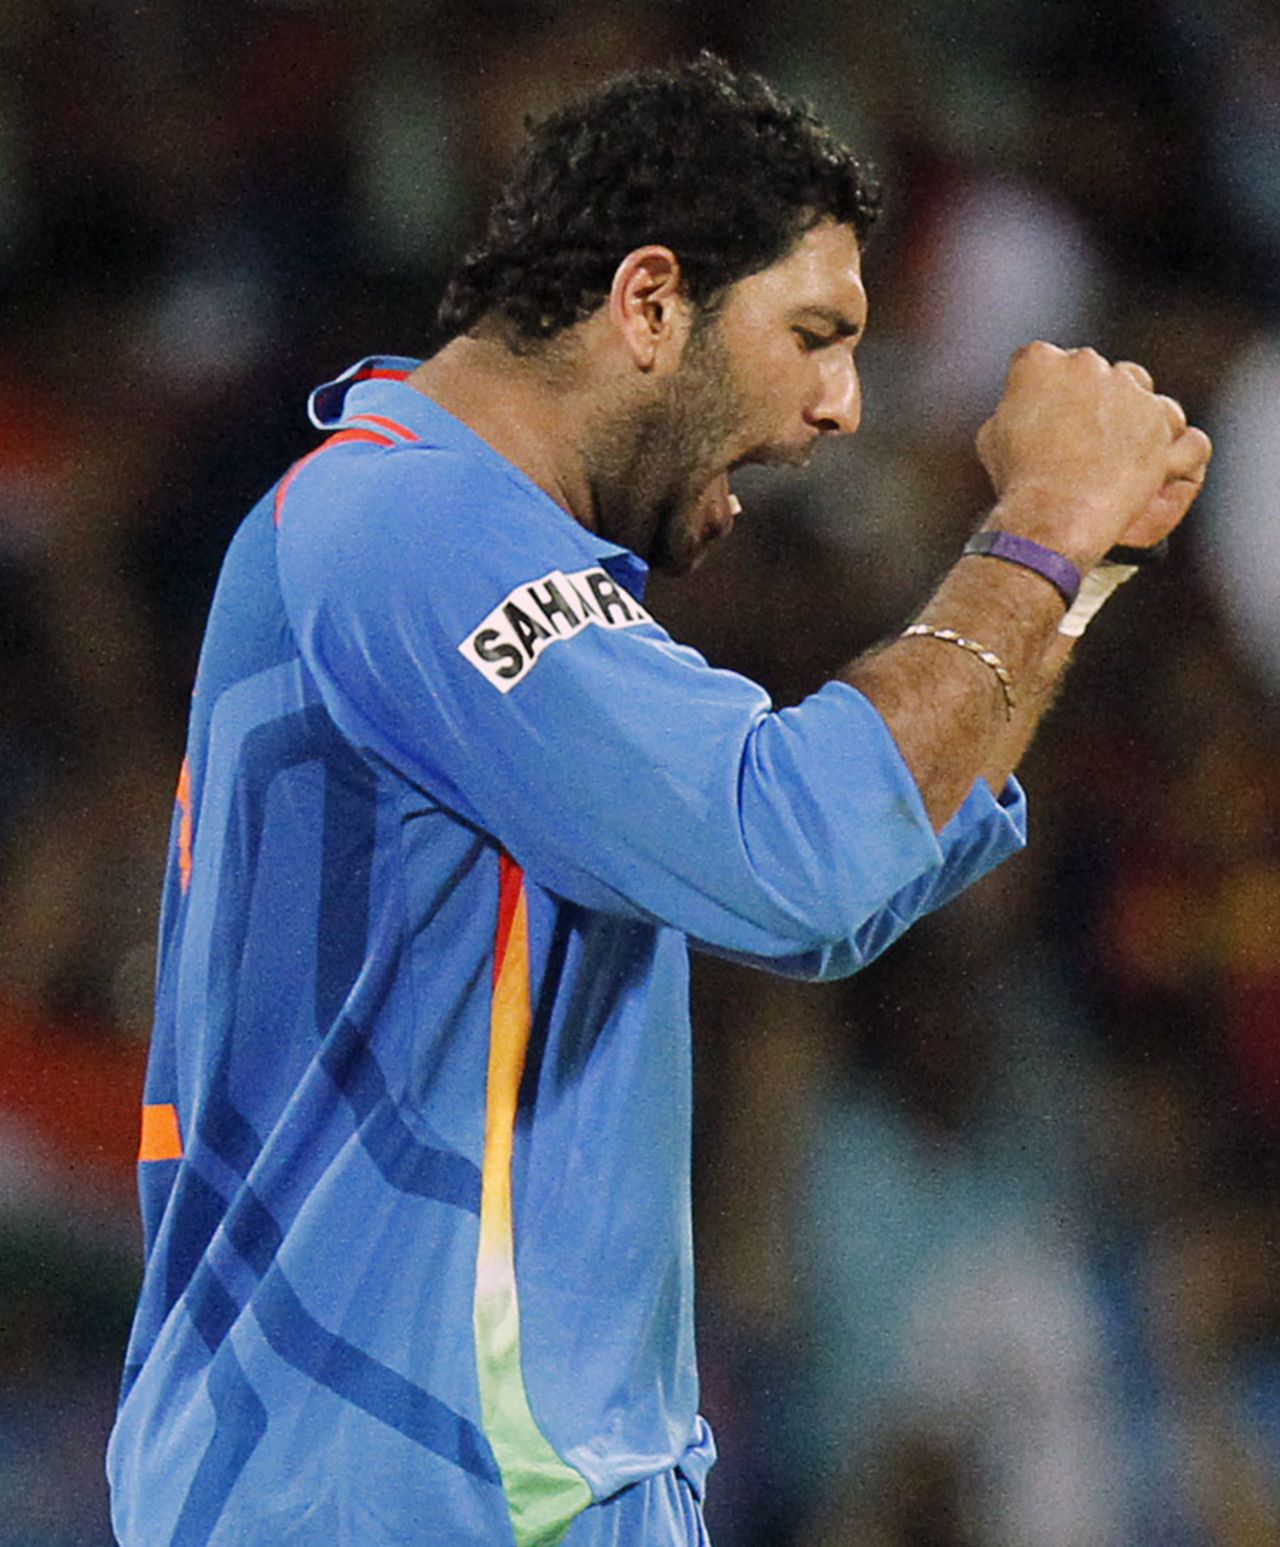 Yuvraj Singh celebrates his second wicket, India v West Indies, Group B, World Cup 2011, March 20, 2011